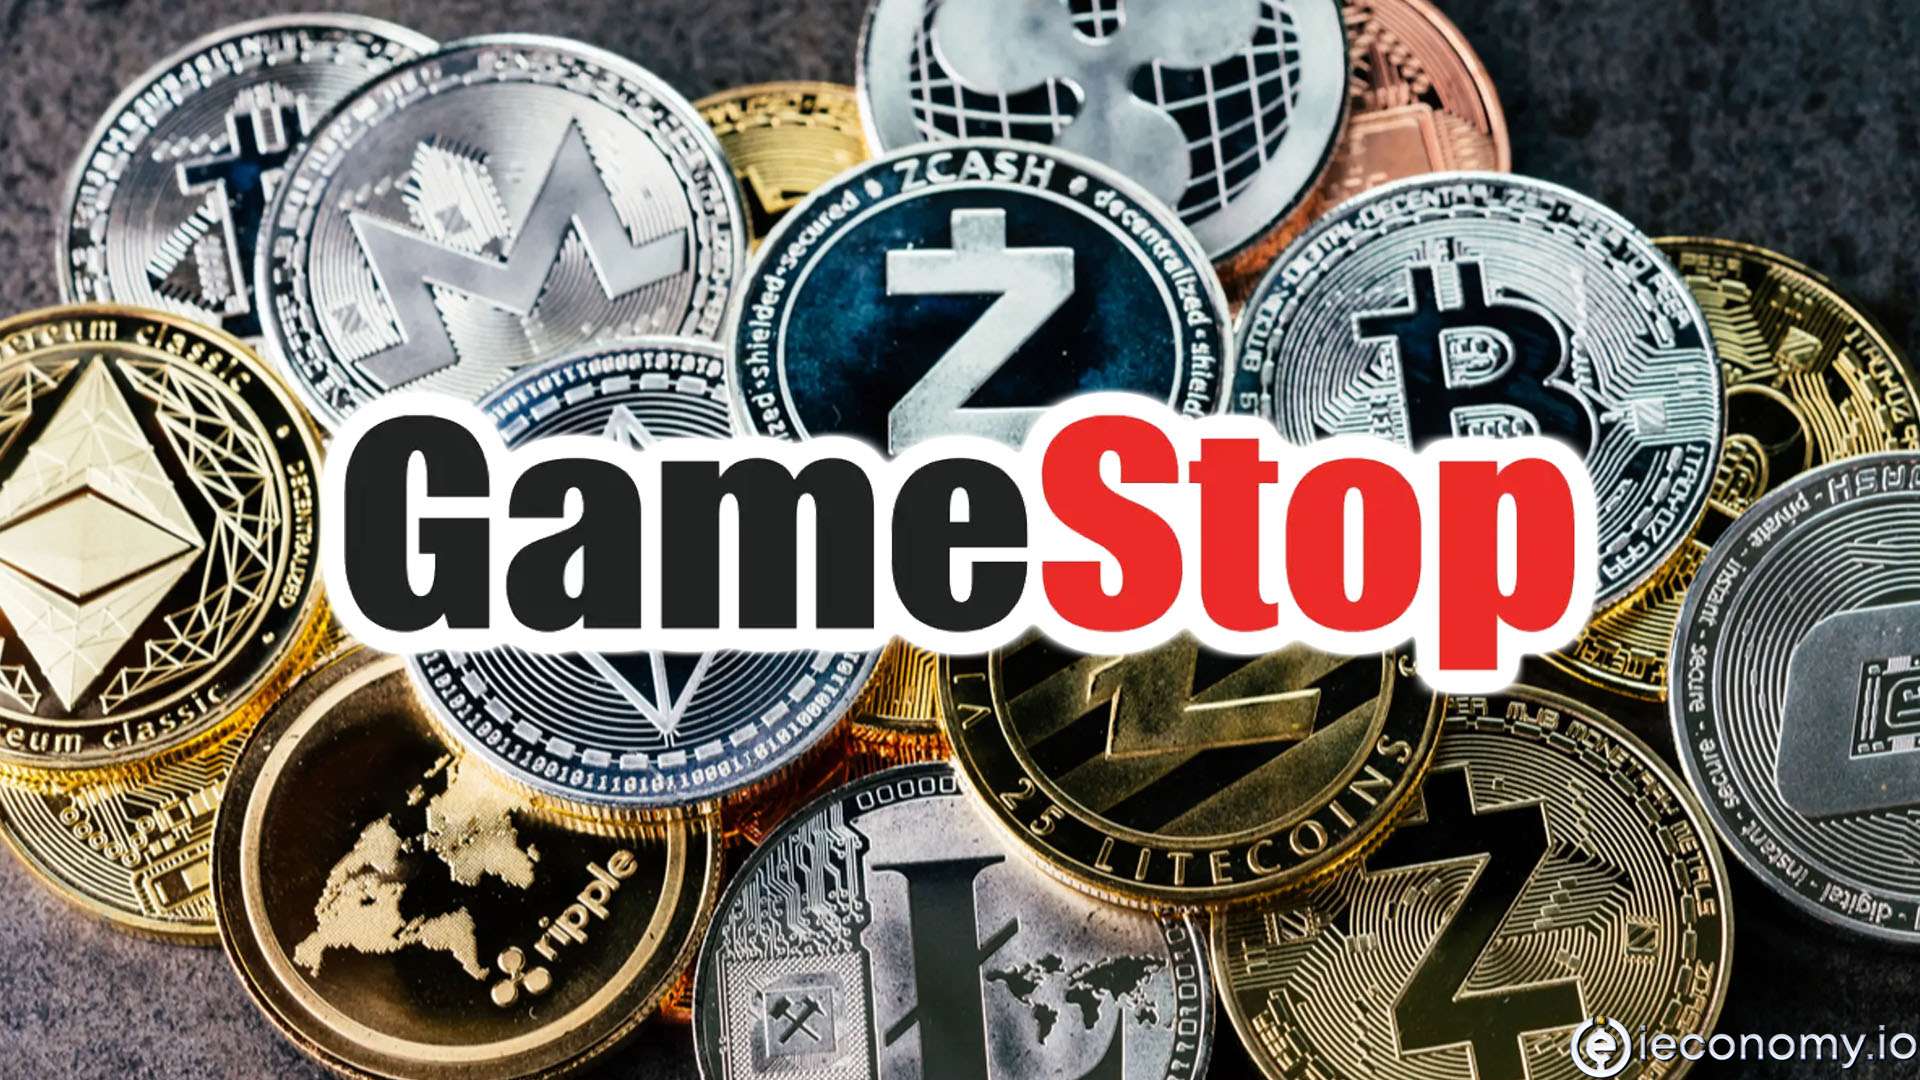 GameStop Boosts Crypto Efforts by Partnering while FTX US